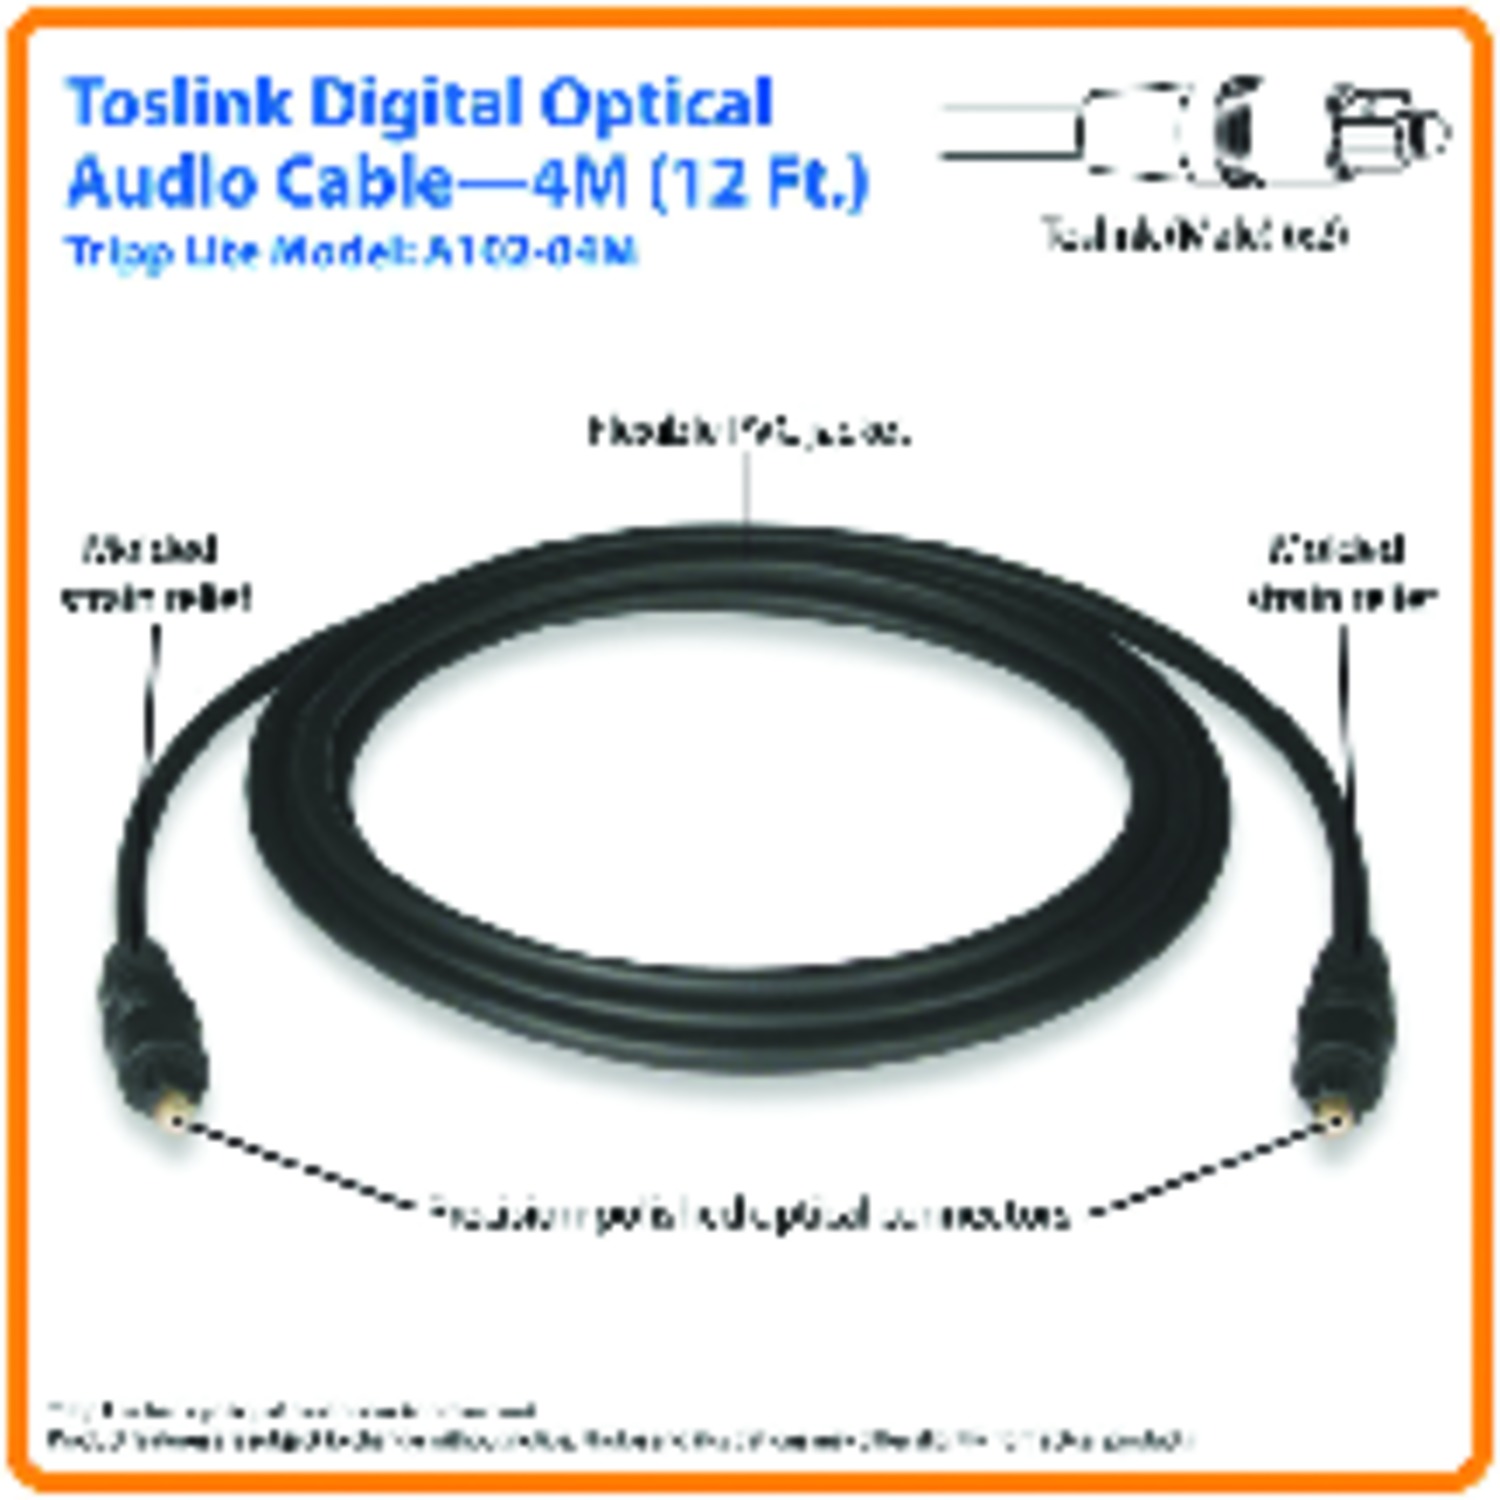 Tripp Lite A102-04m Tosl digitl Optical Spdif Audio Cable (13ft) - image 3 of 4